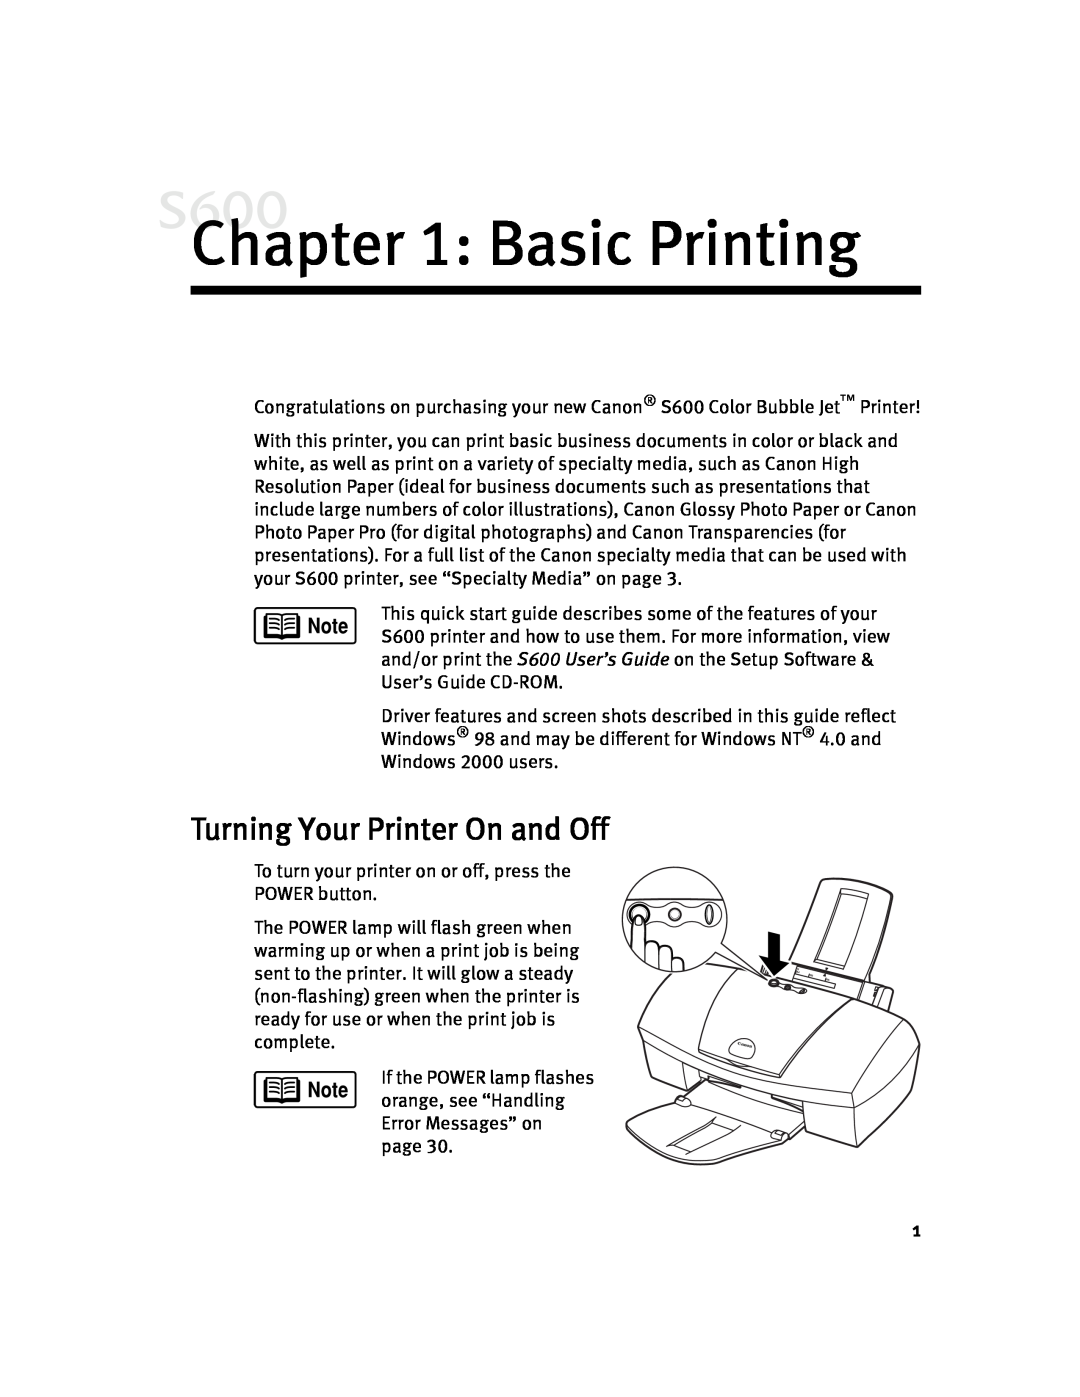 Canon S600 quick start Basic Printing, Turning Your Printer On and Off 